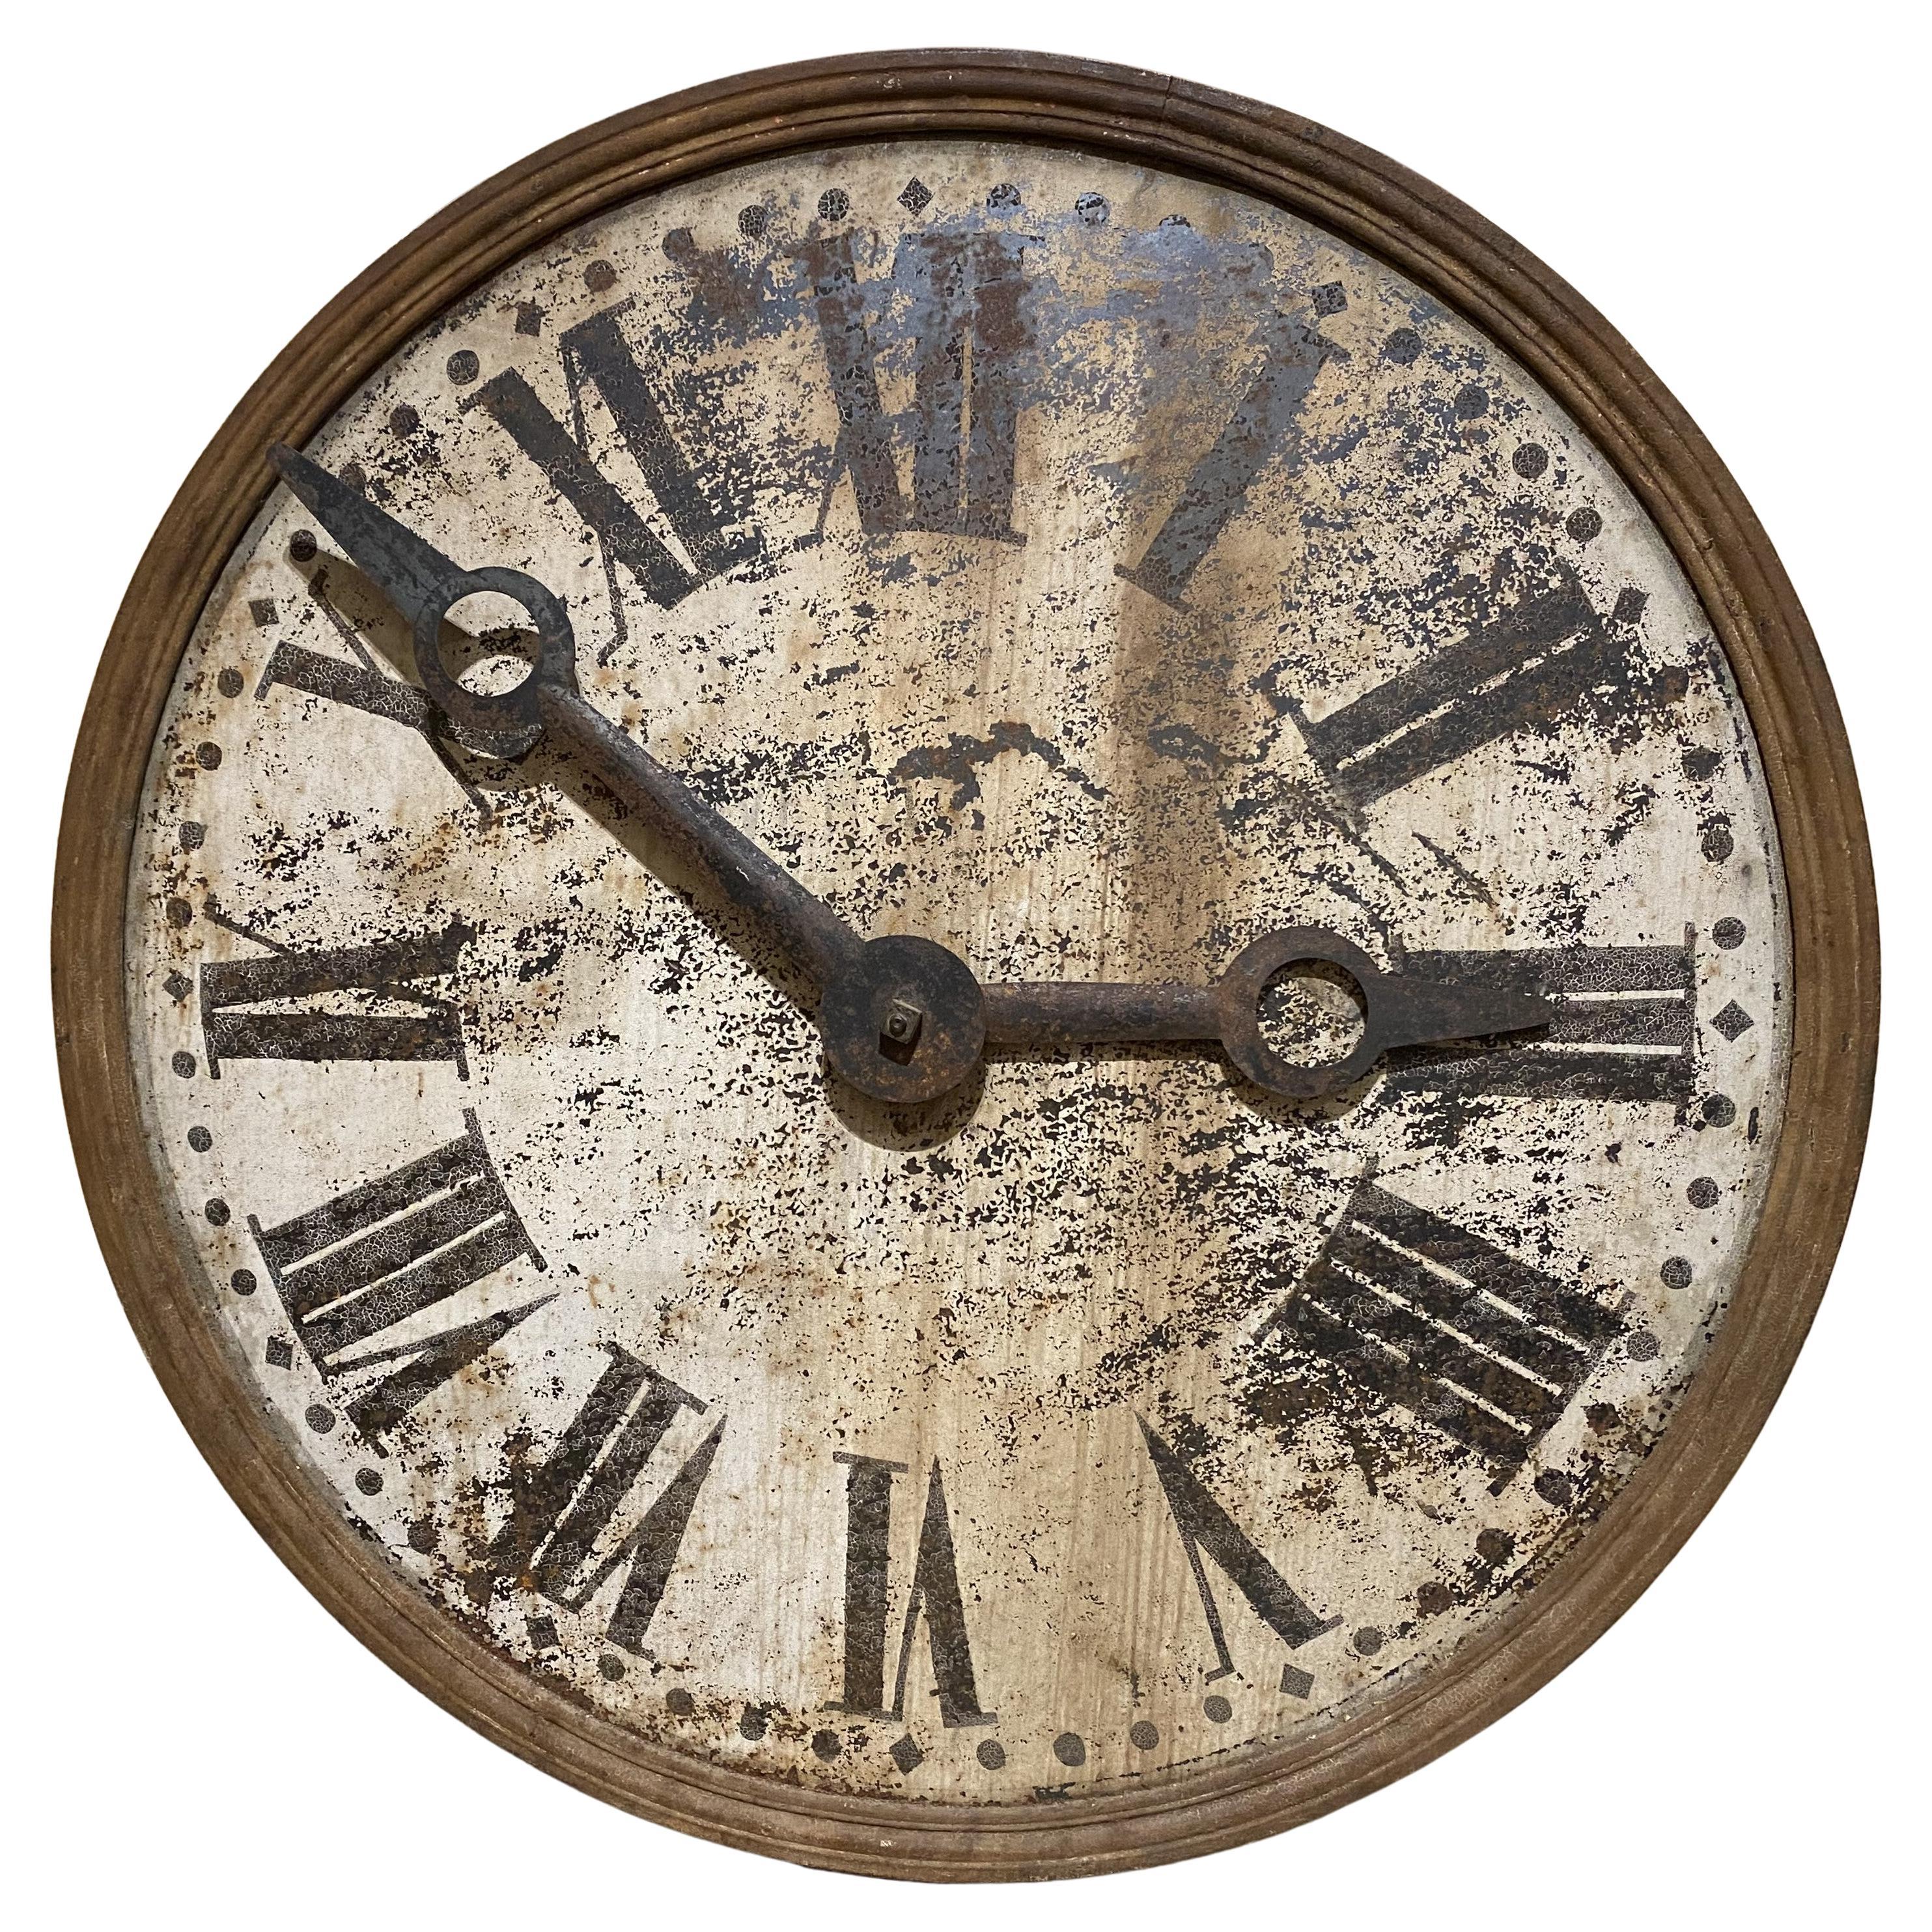 19th Century Iron Clock Dial with Hands circa 1825-1850